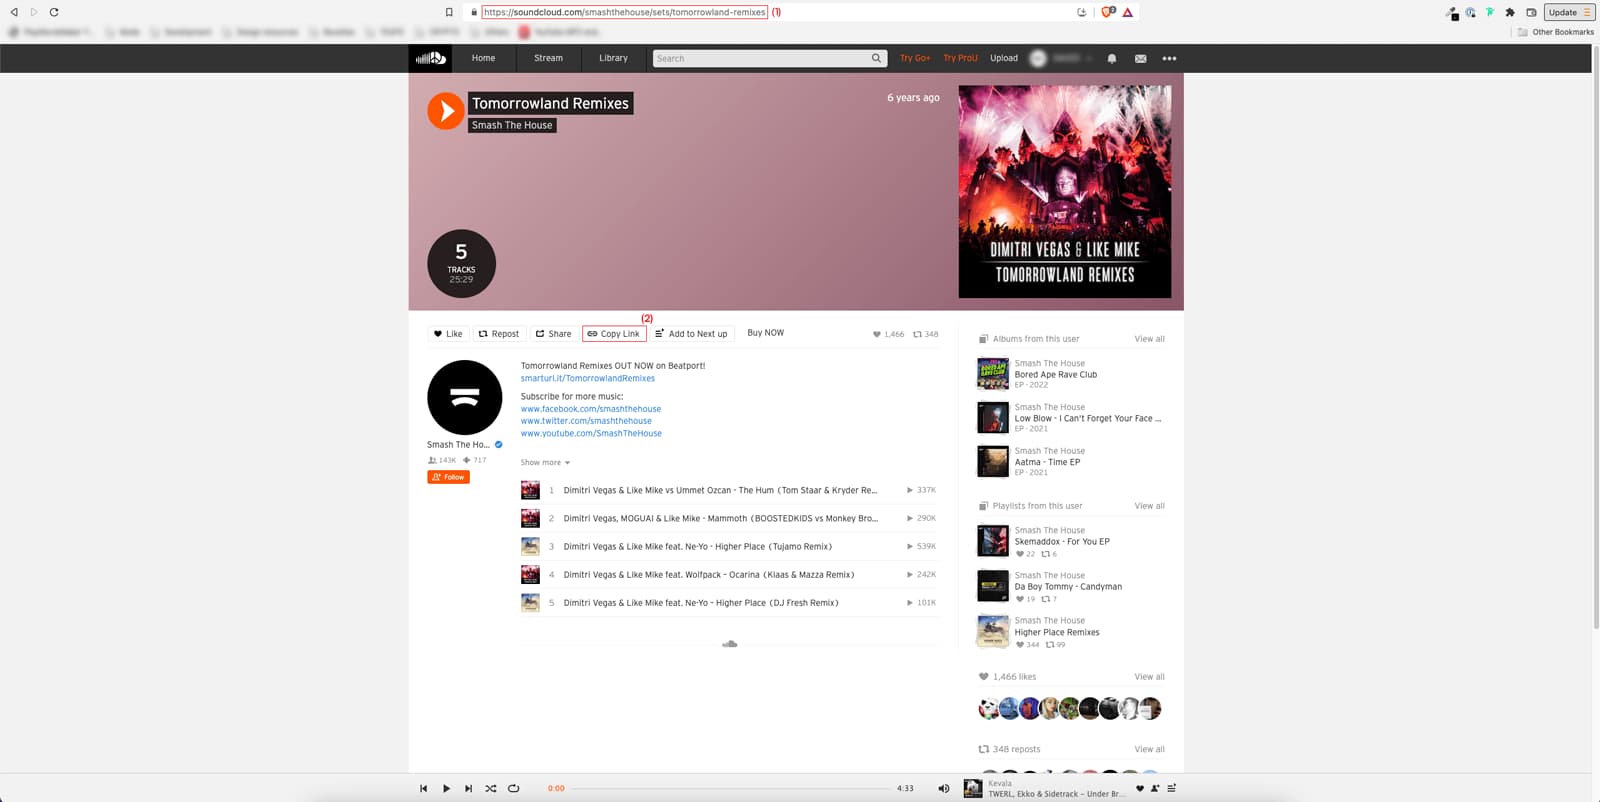 How to download Soundcloud playlist?